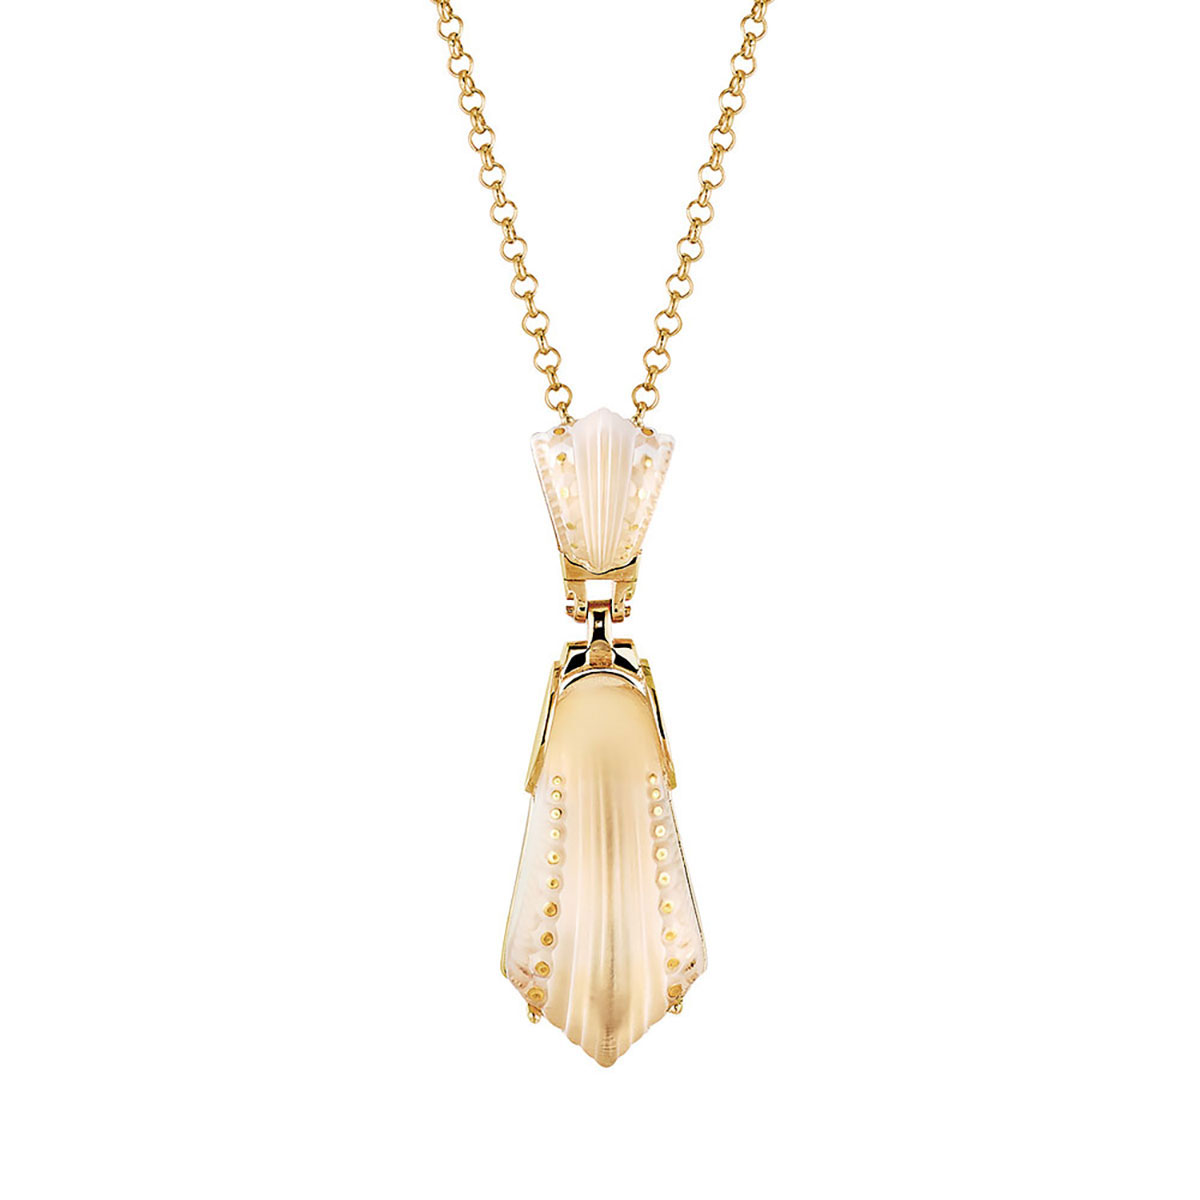 Lalique and Sterling Silver Icone Pendant Necklace, Gold Vermeil